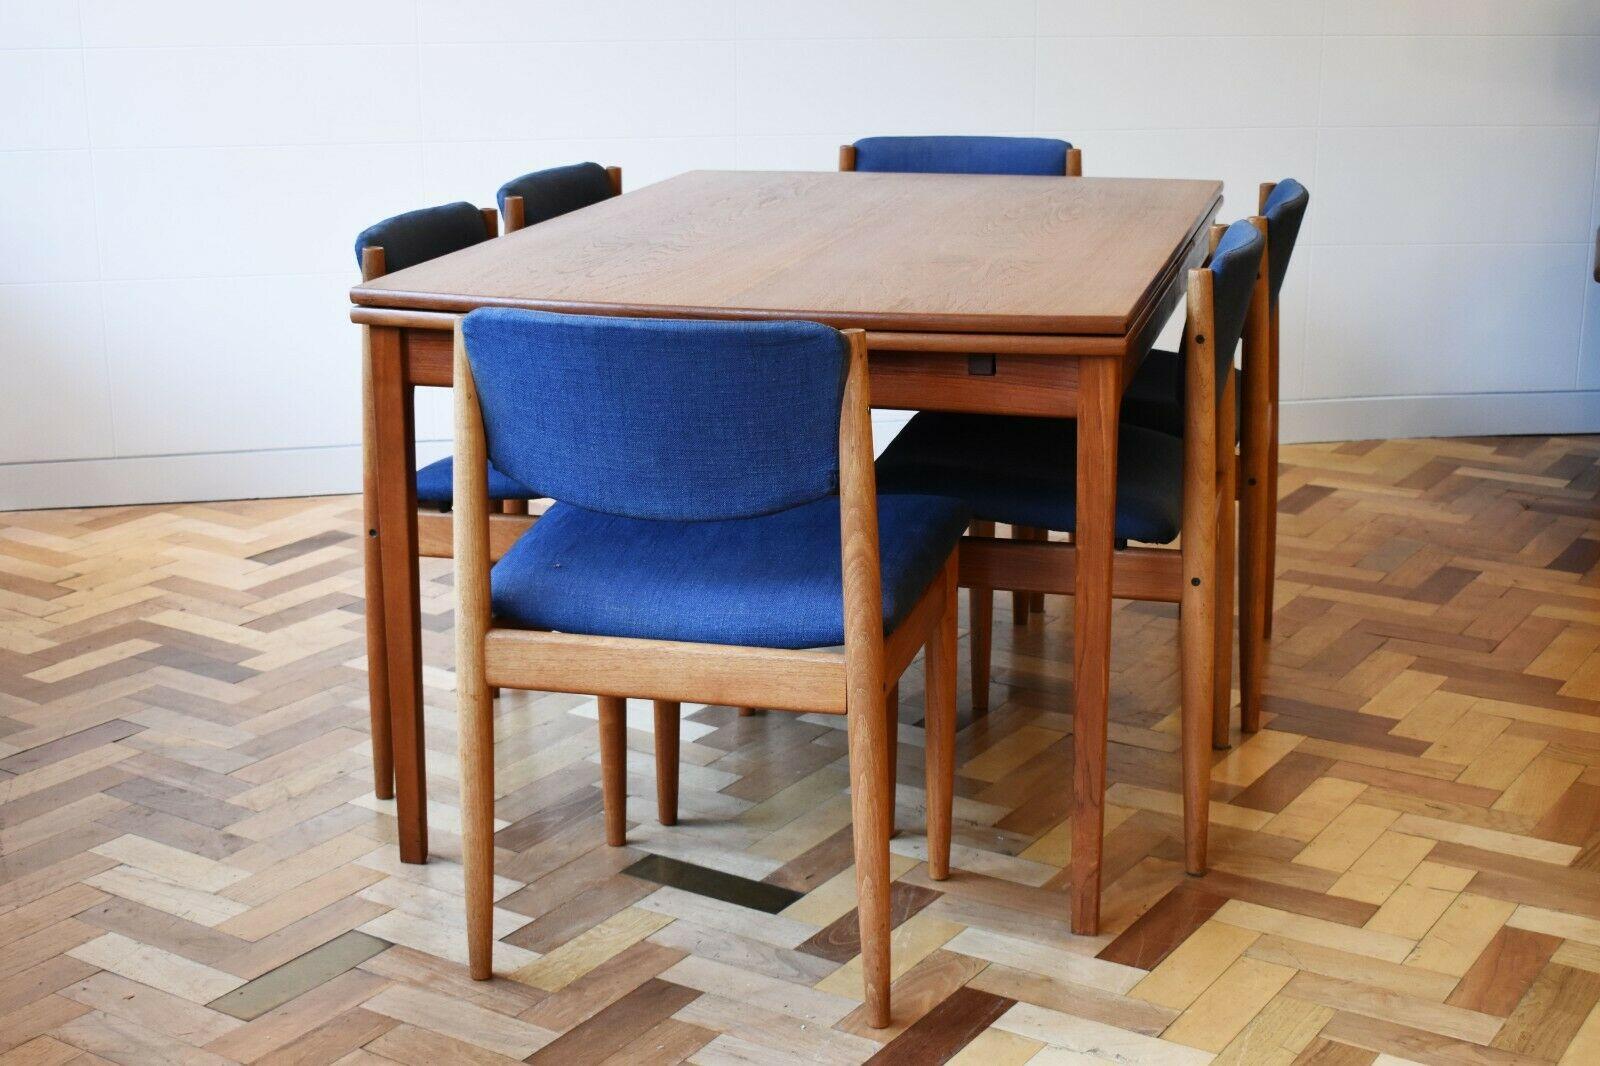 1960's Teakwood extendable dining table with set of 6 chairs by Finn Juhl for France & Sons.

This dining set embodies the beautiful simplicity of Danish modernist design. 

Made in teakwood, the dining table is extendable to cater for a variety of